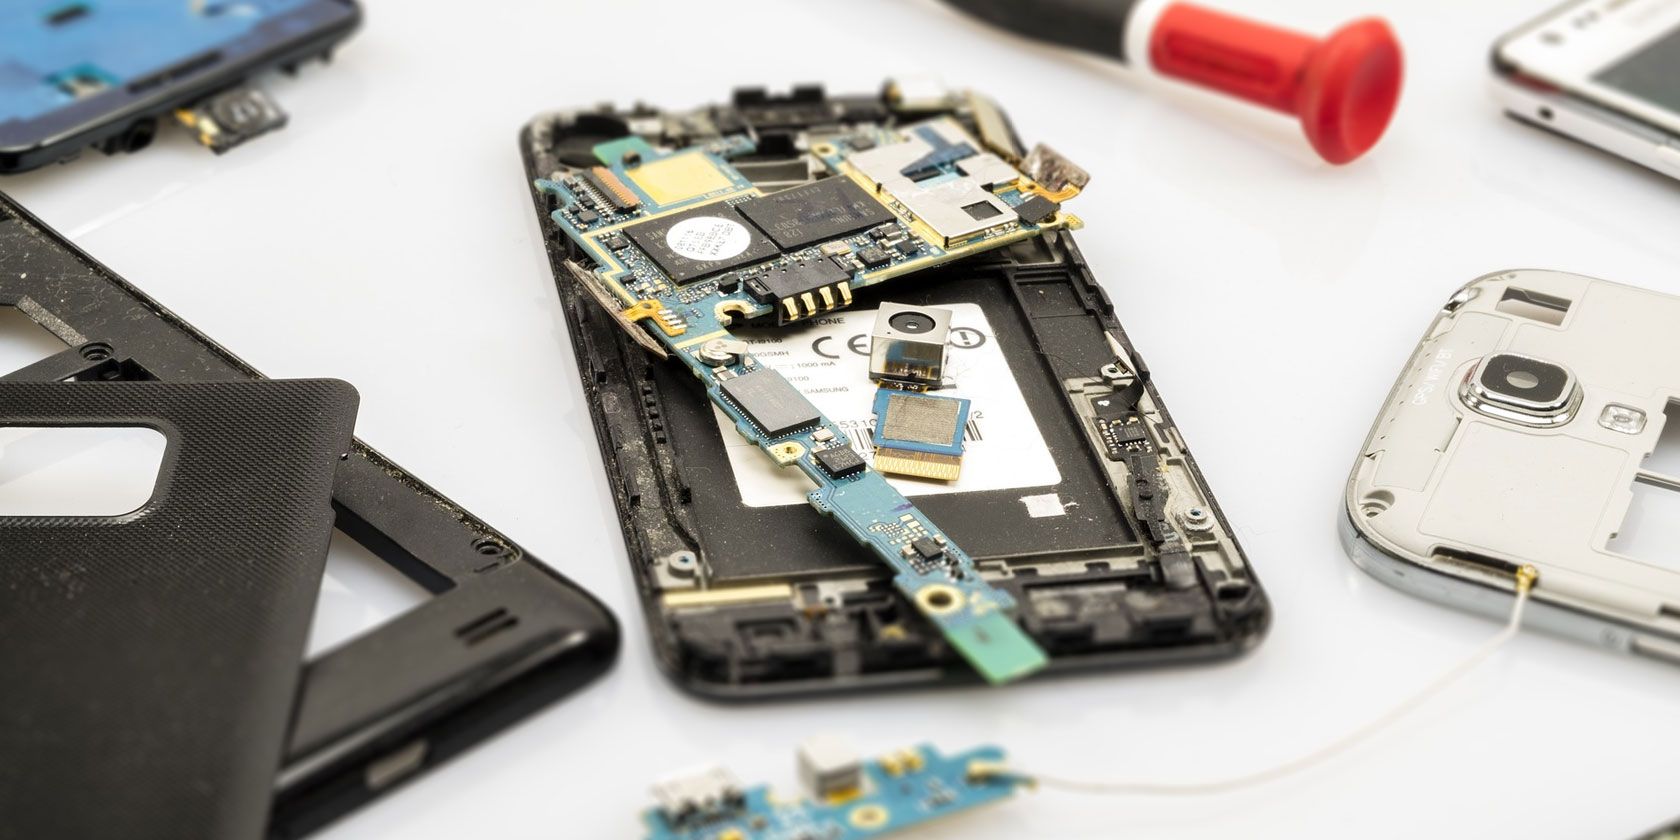 Learn to Fix Your Own Gadgets With Help From These 5 Sites